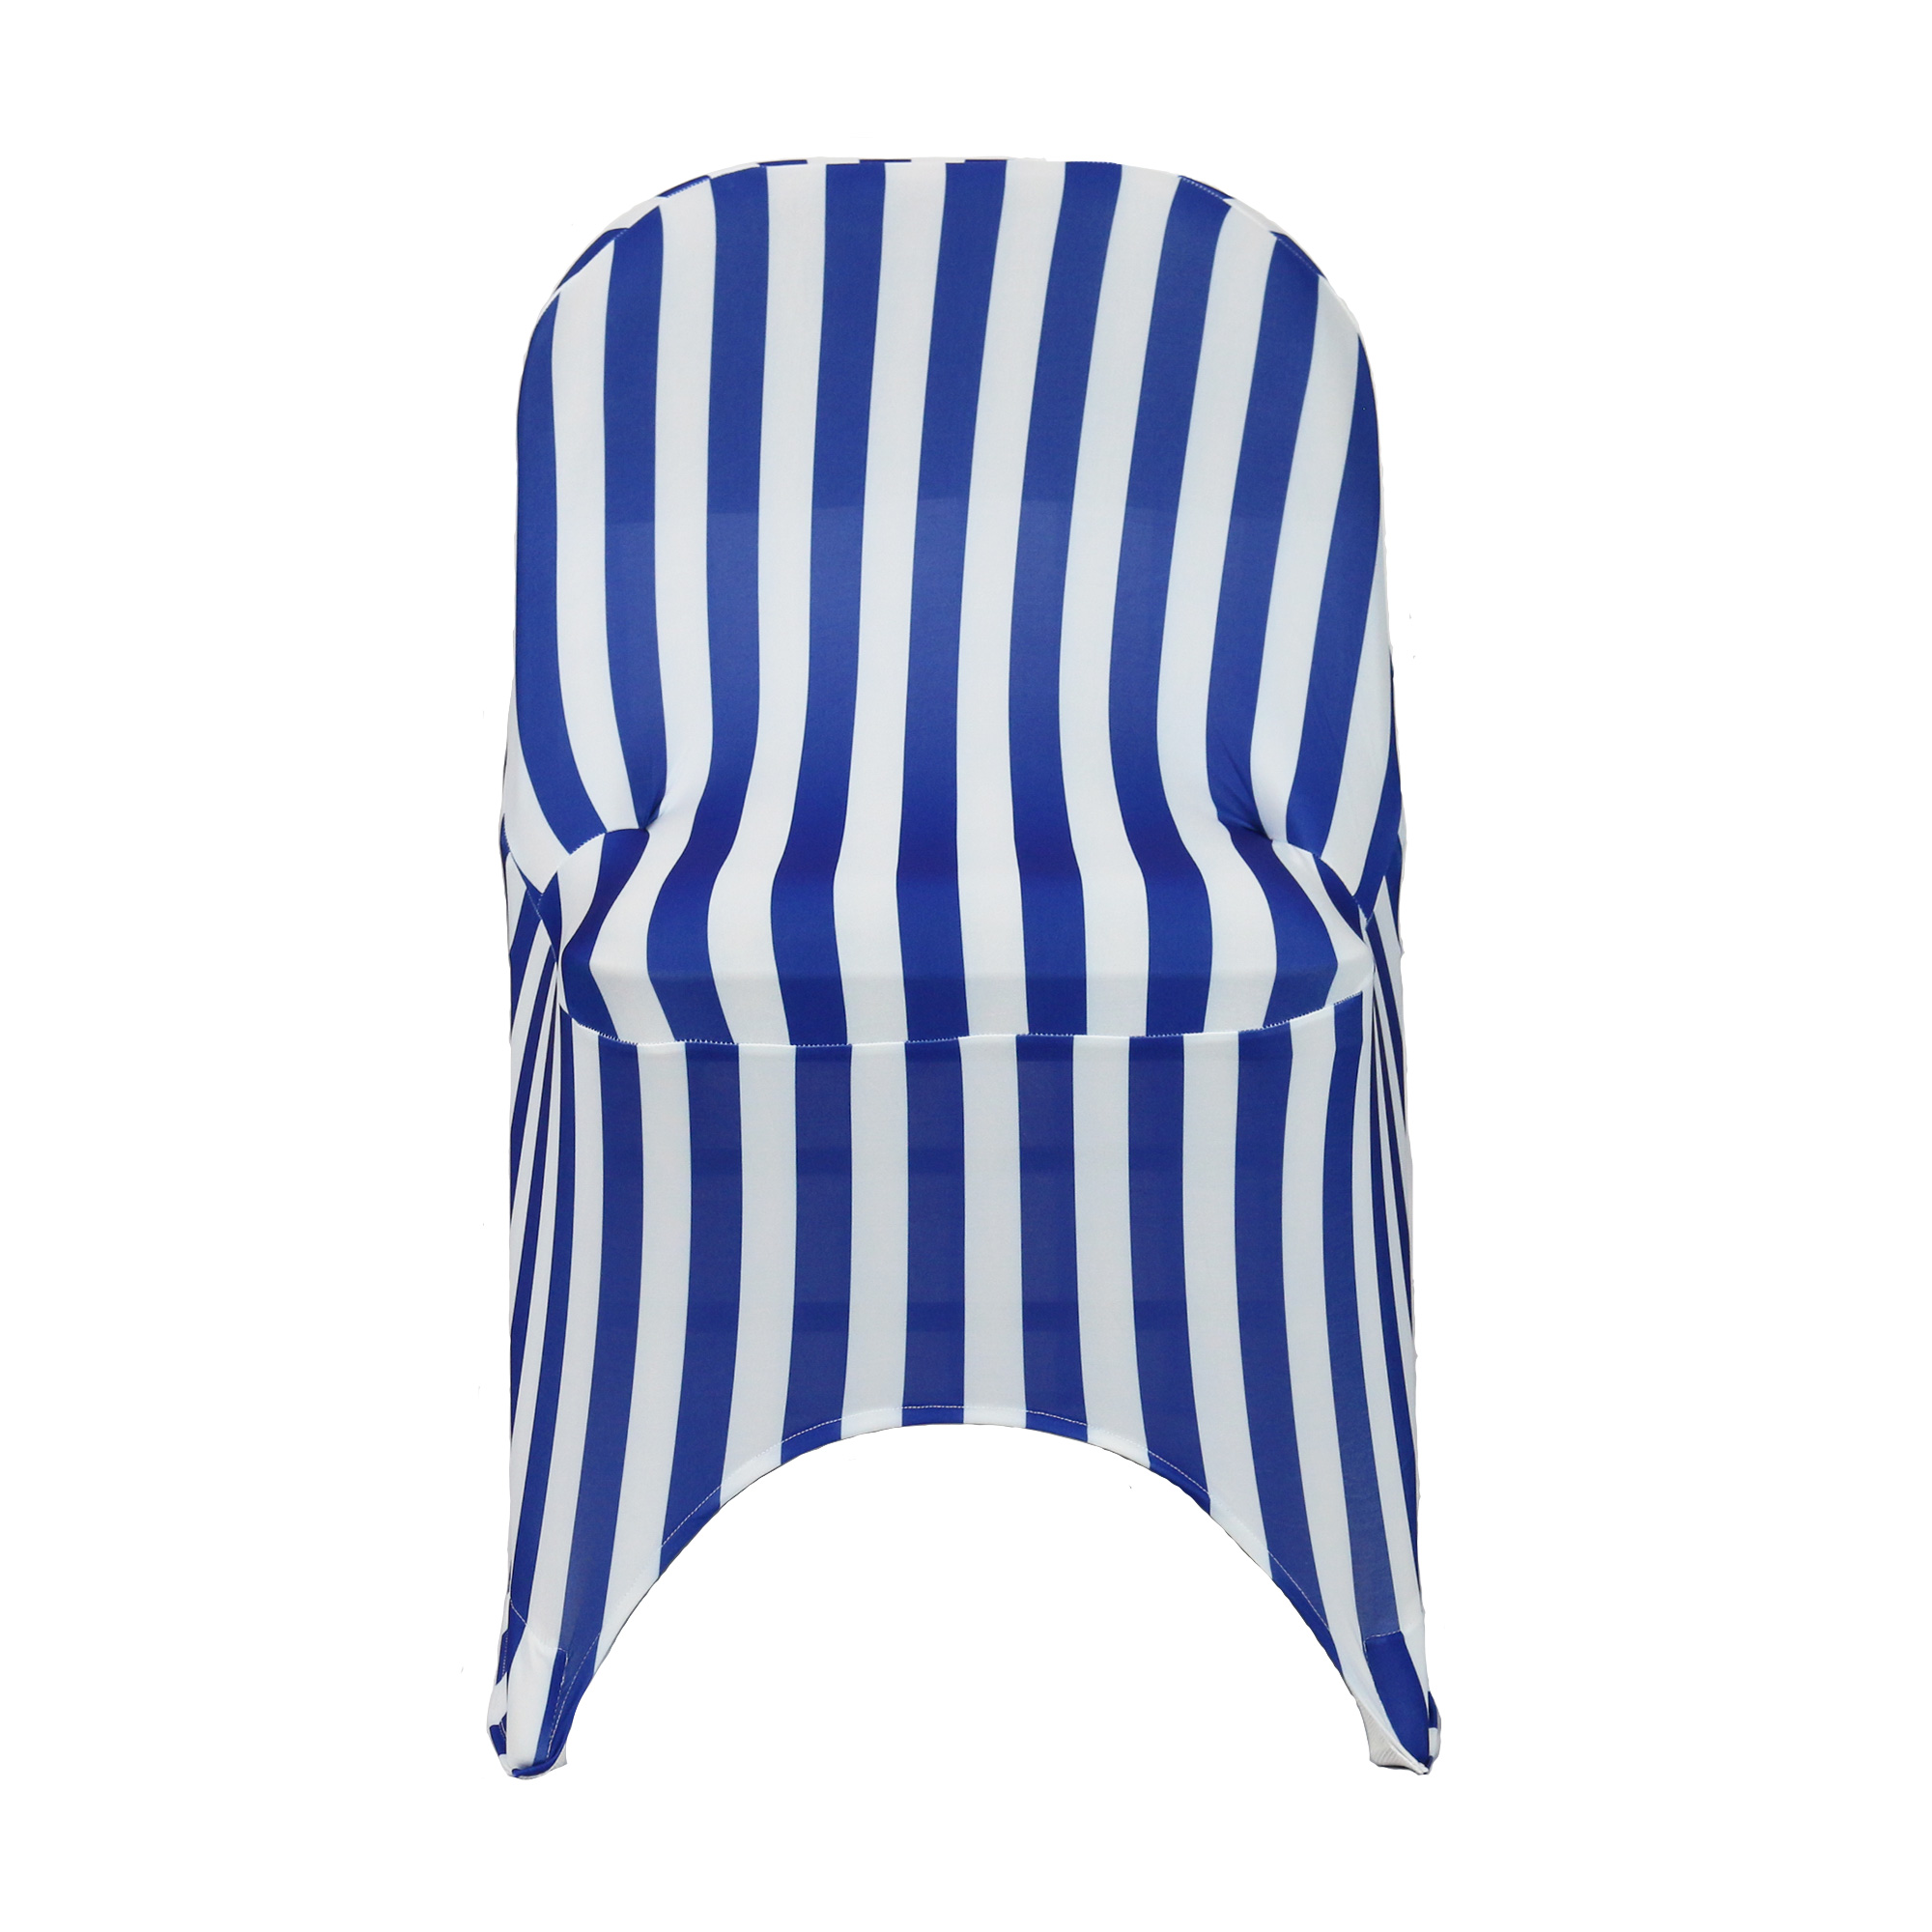 Your Chair Covers - Stretch Spandex Folding Chair Covers Striped Royal Blue/White for Wedding, Party, Birthday, Patio, etc. - image 3 of 3